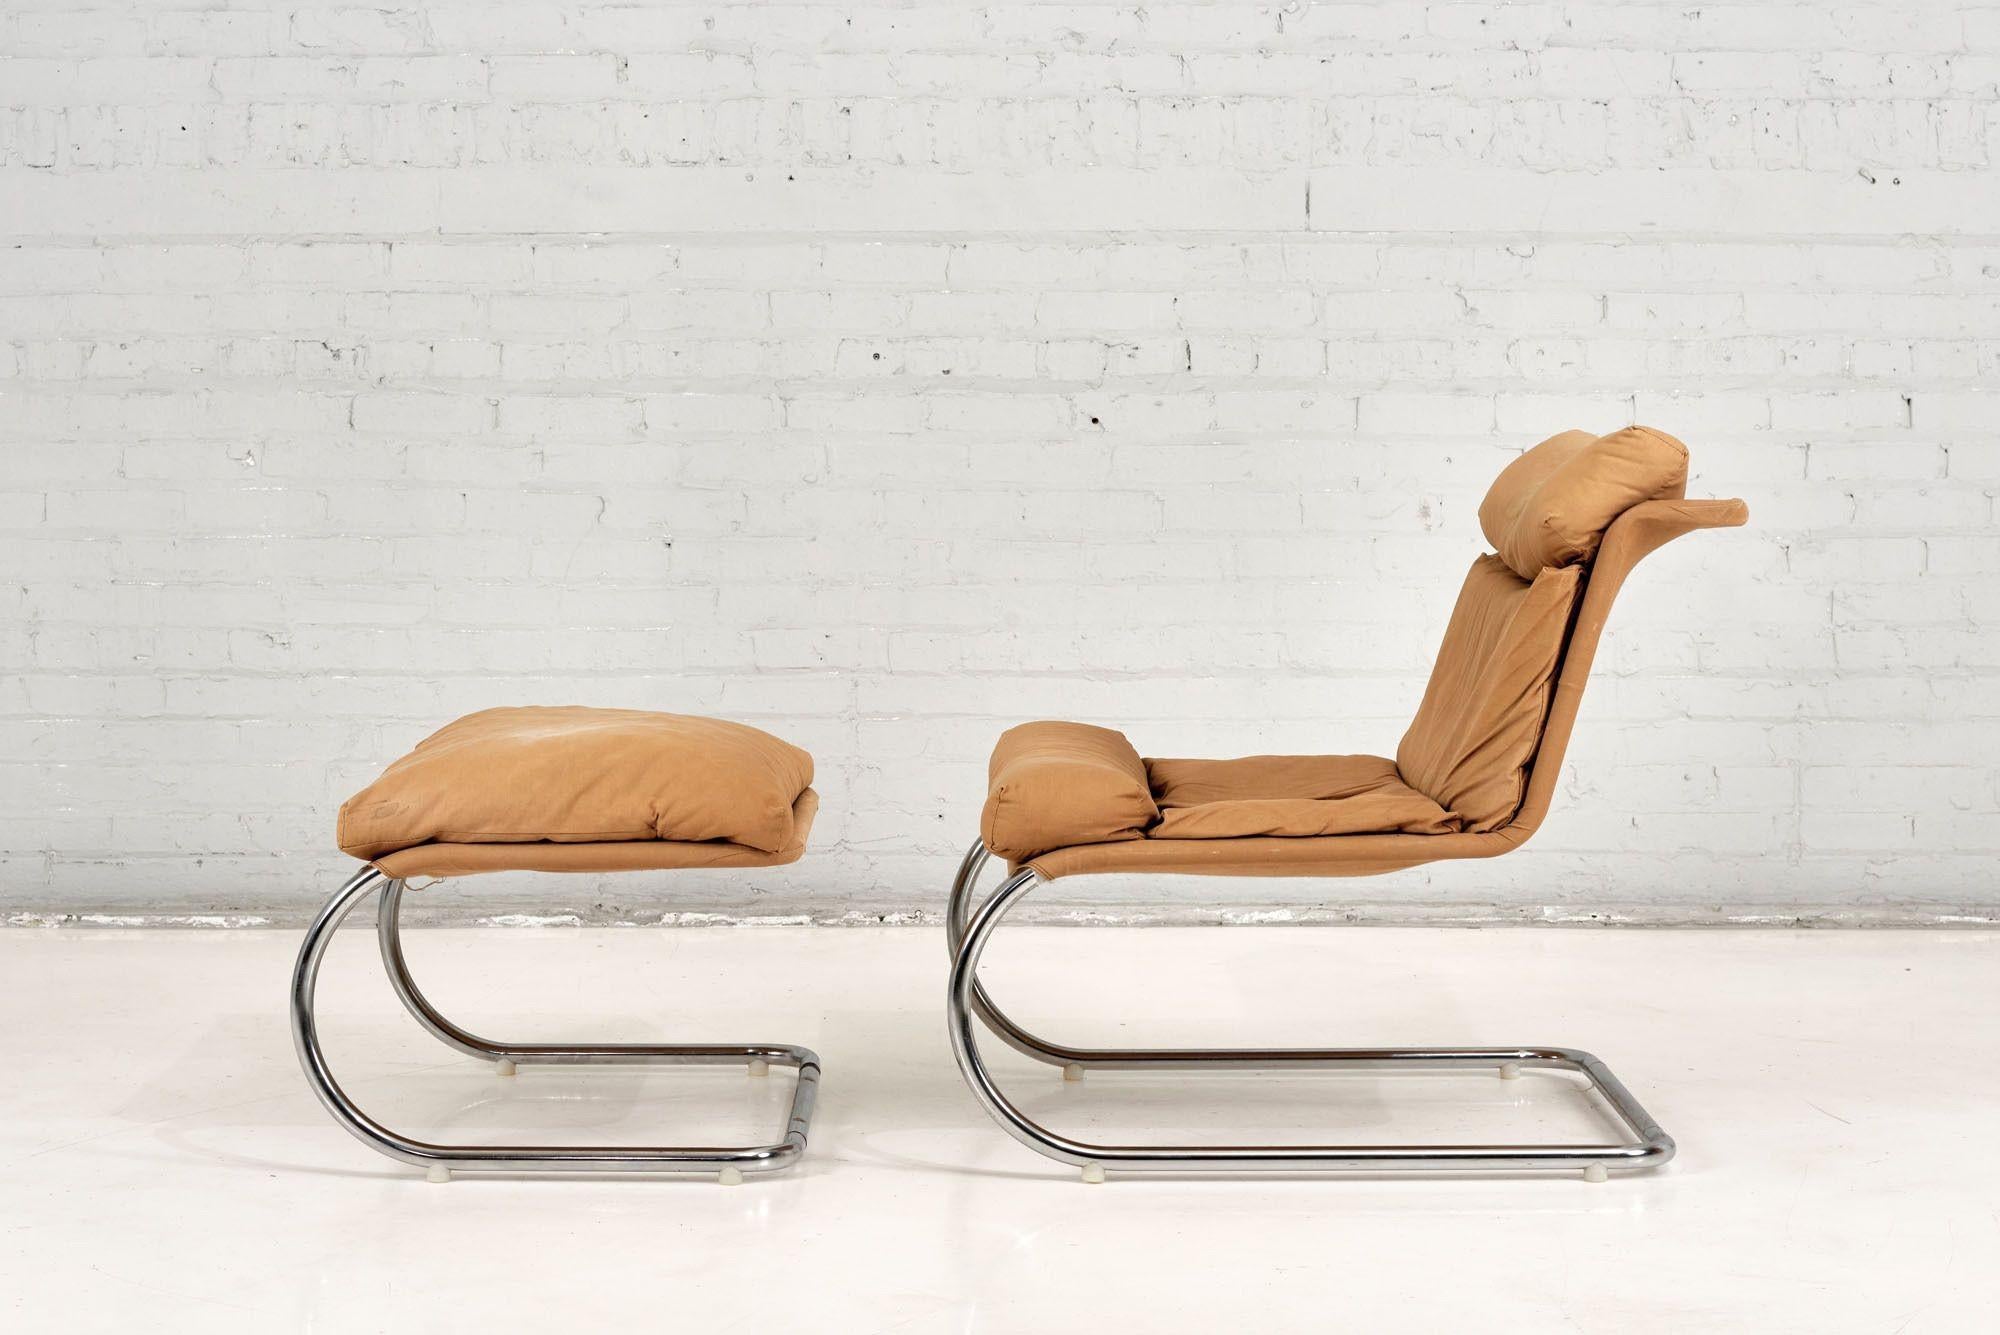 American Stainless Steel & Canvas Cantilever MR Lounge Chair & Ottoman, 1960 For Sale